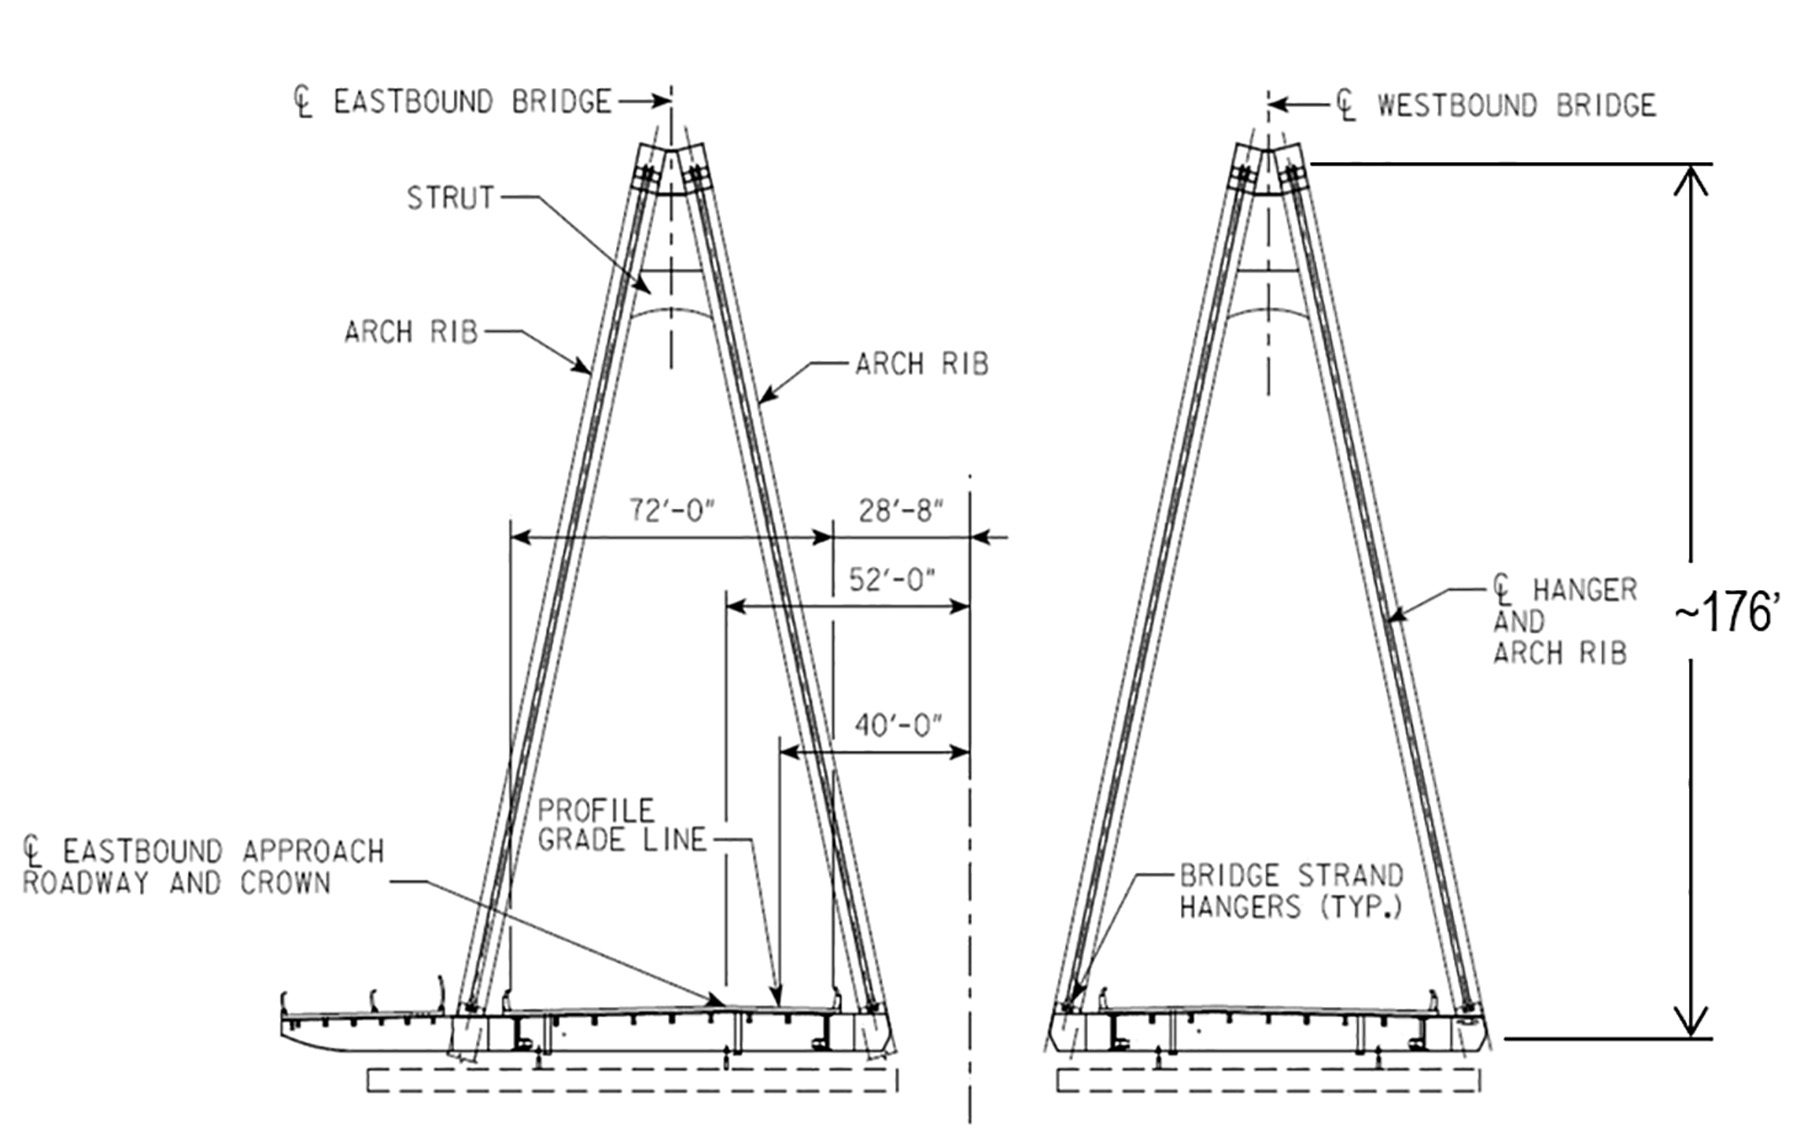 The drawing shows the cross section of the east and westbound spans of a twin-span bridge. 